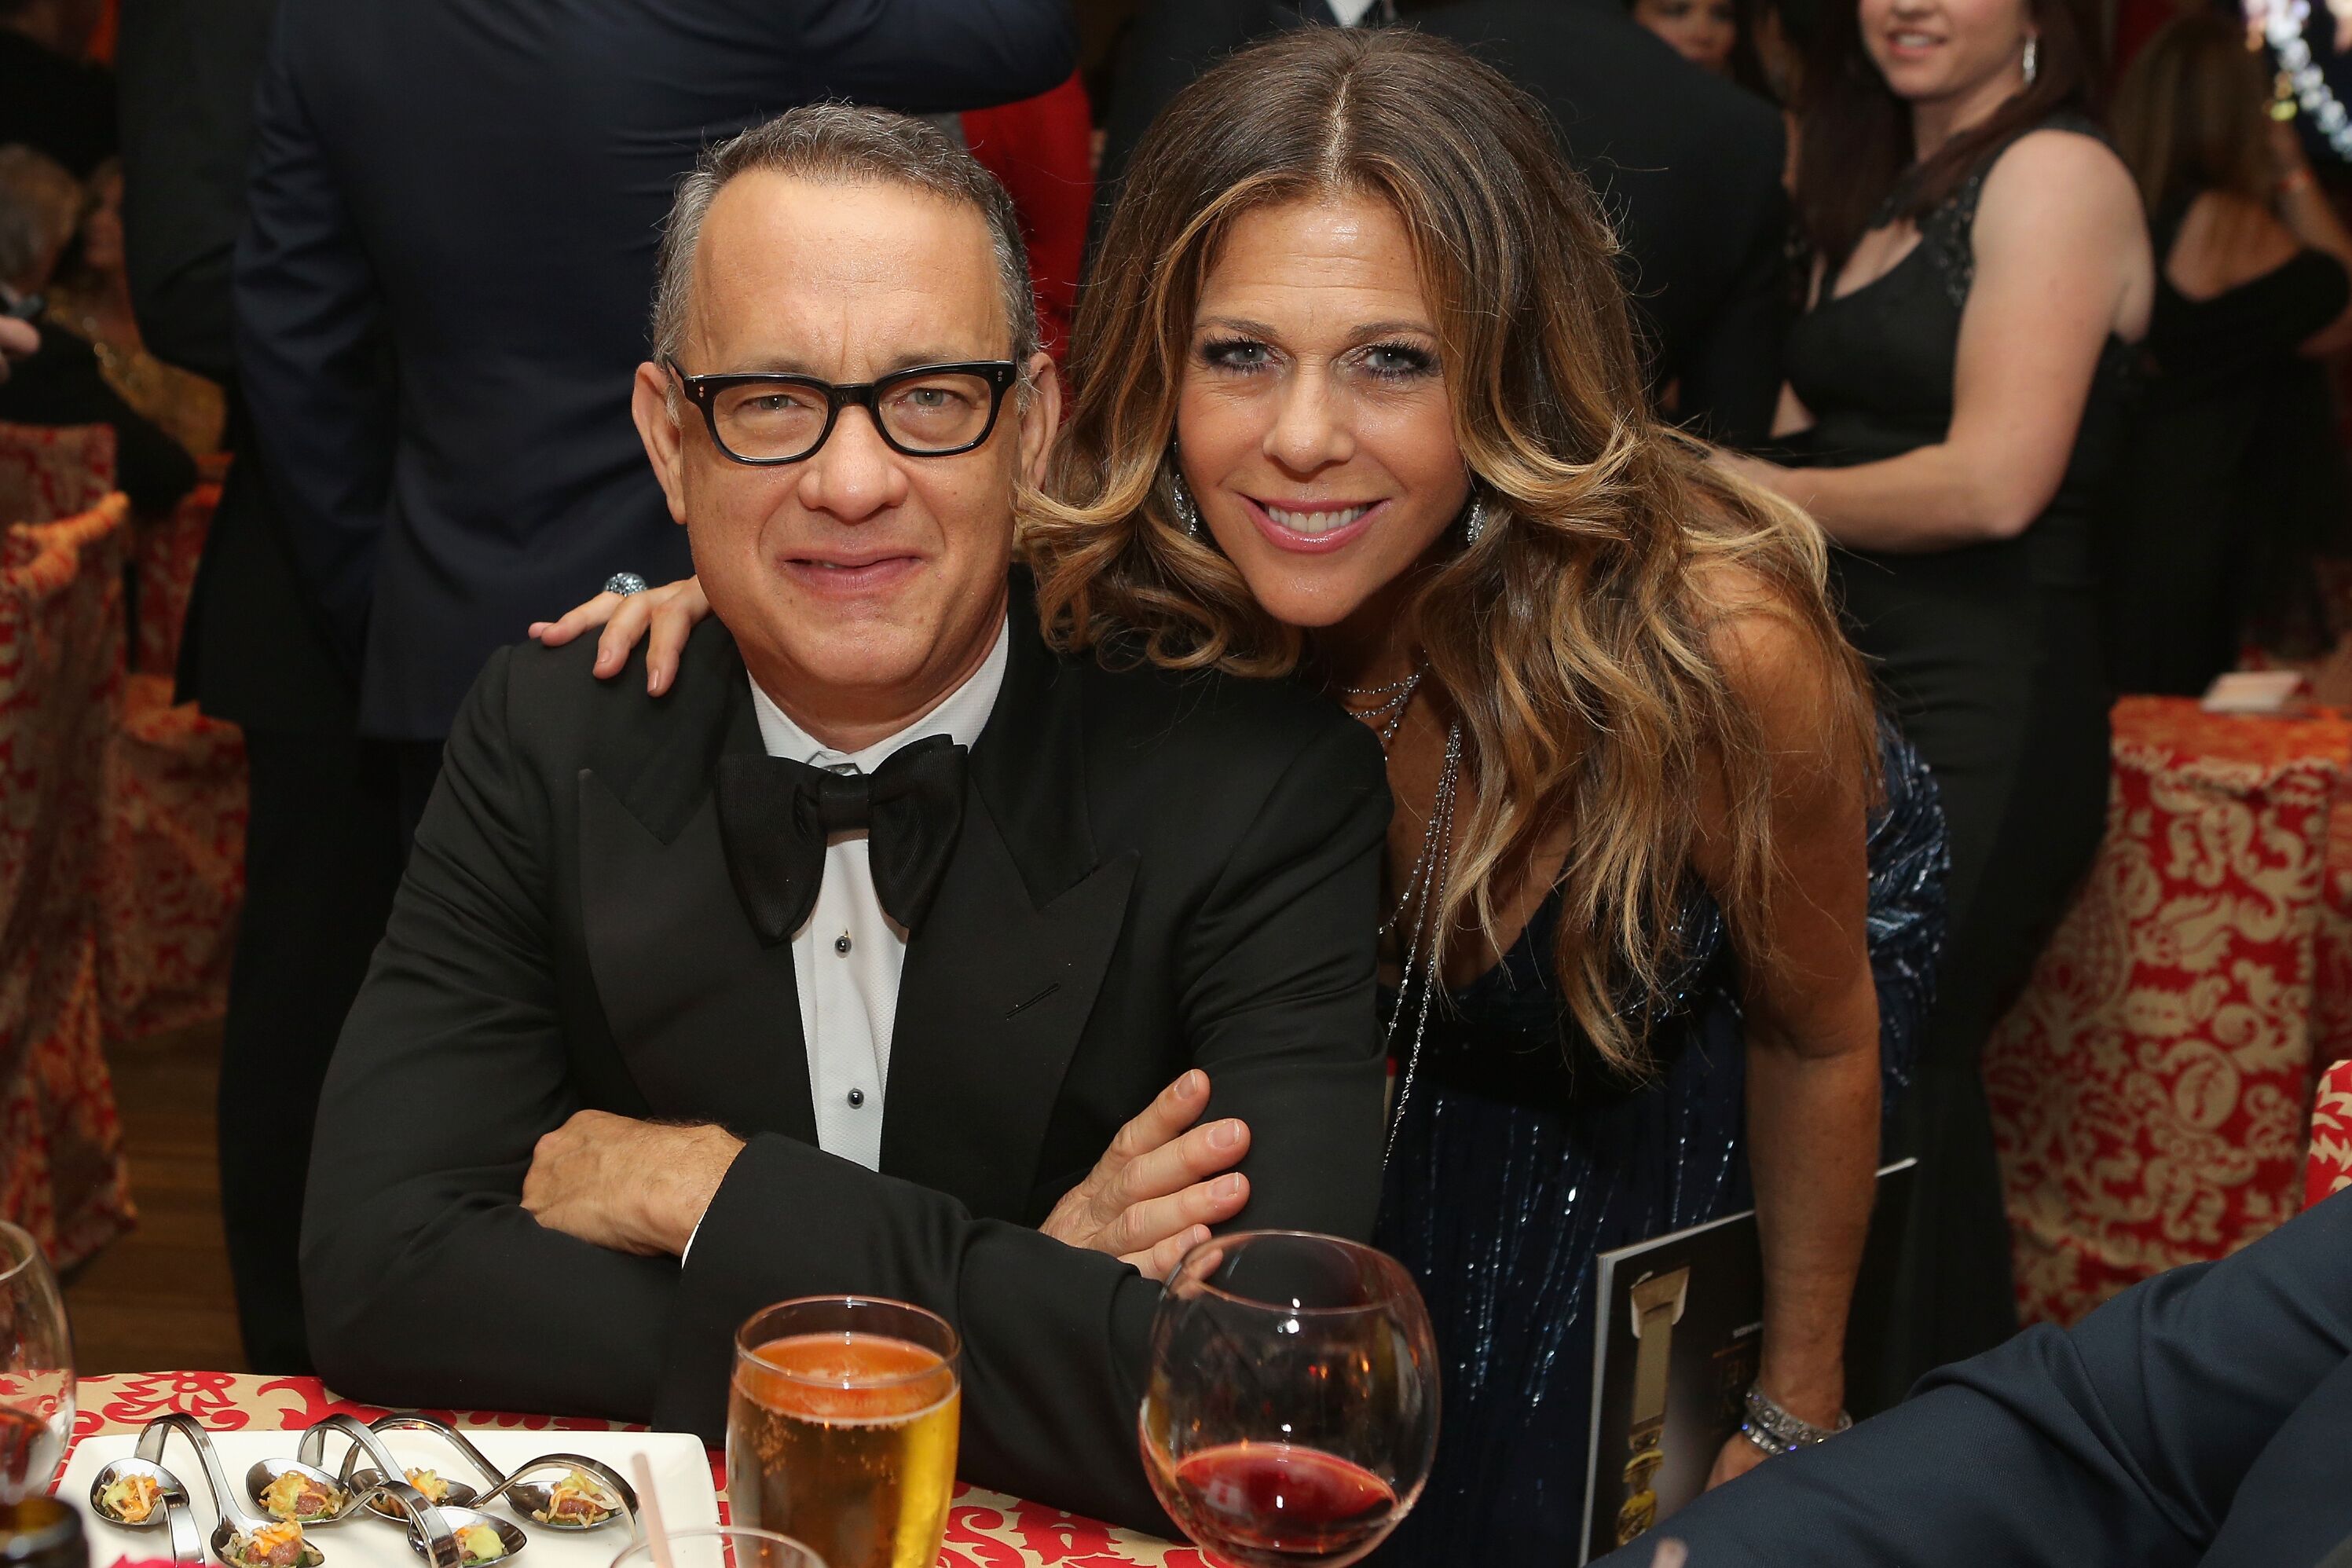 Tom Hanks and Rita Wilson at HBO's Post-Golden Globe Awards Party on January 12, 2014, in Los Angeles, California | Photo: Mike Windle/Getty Images